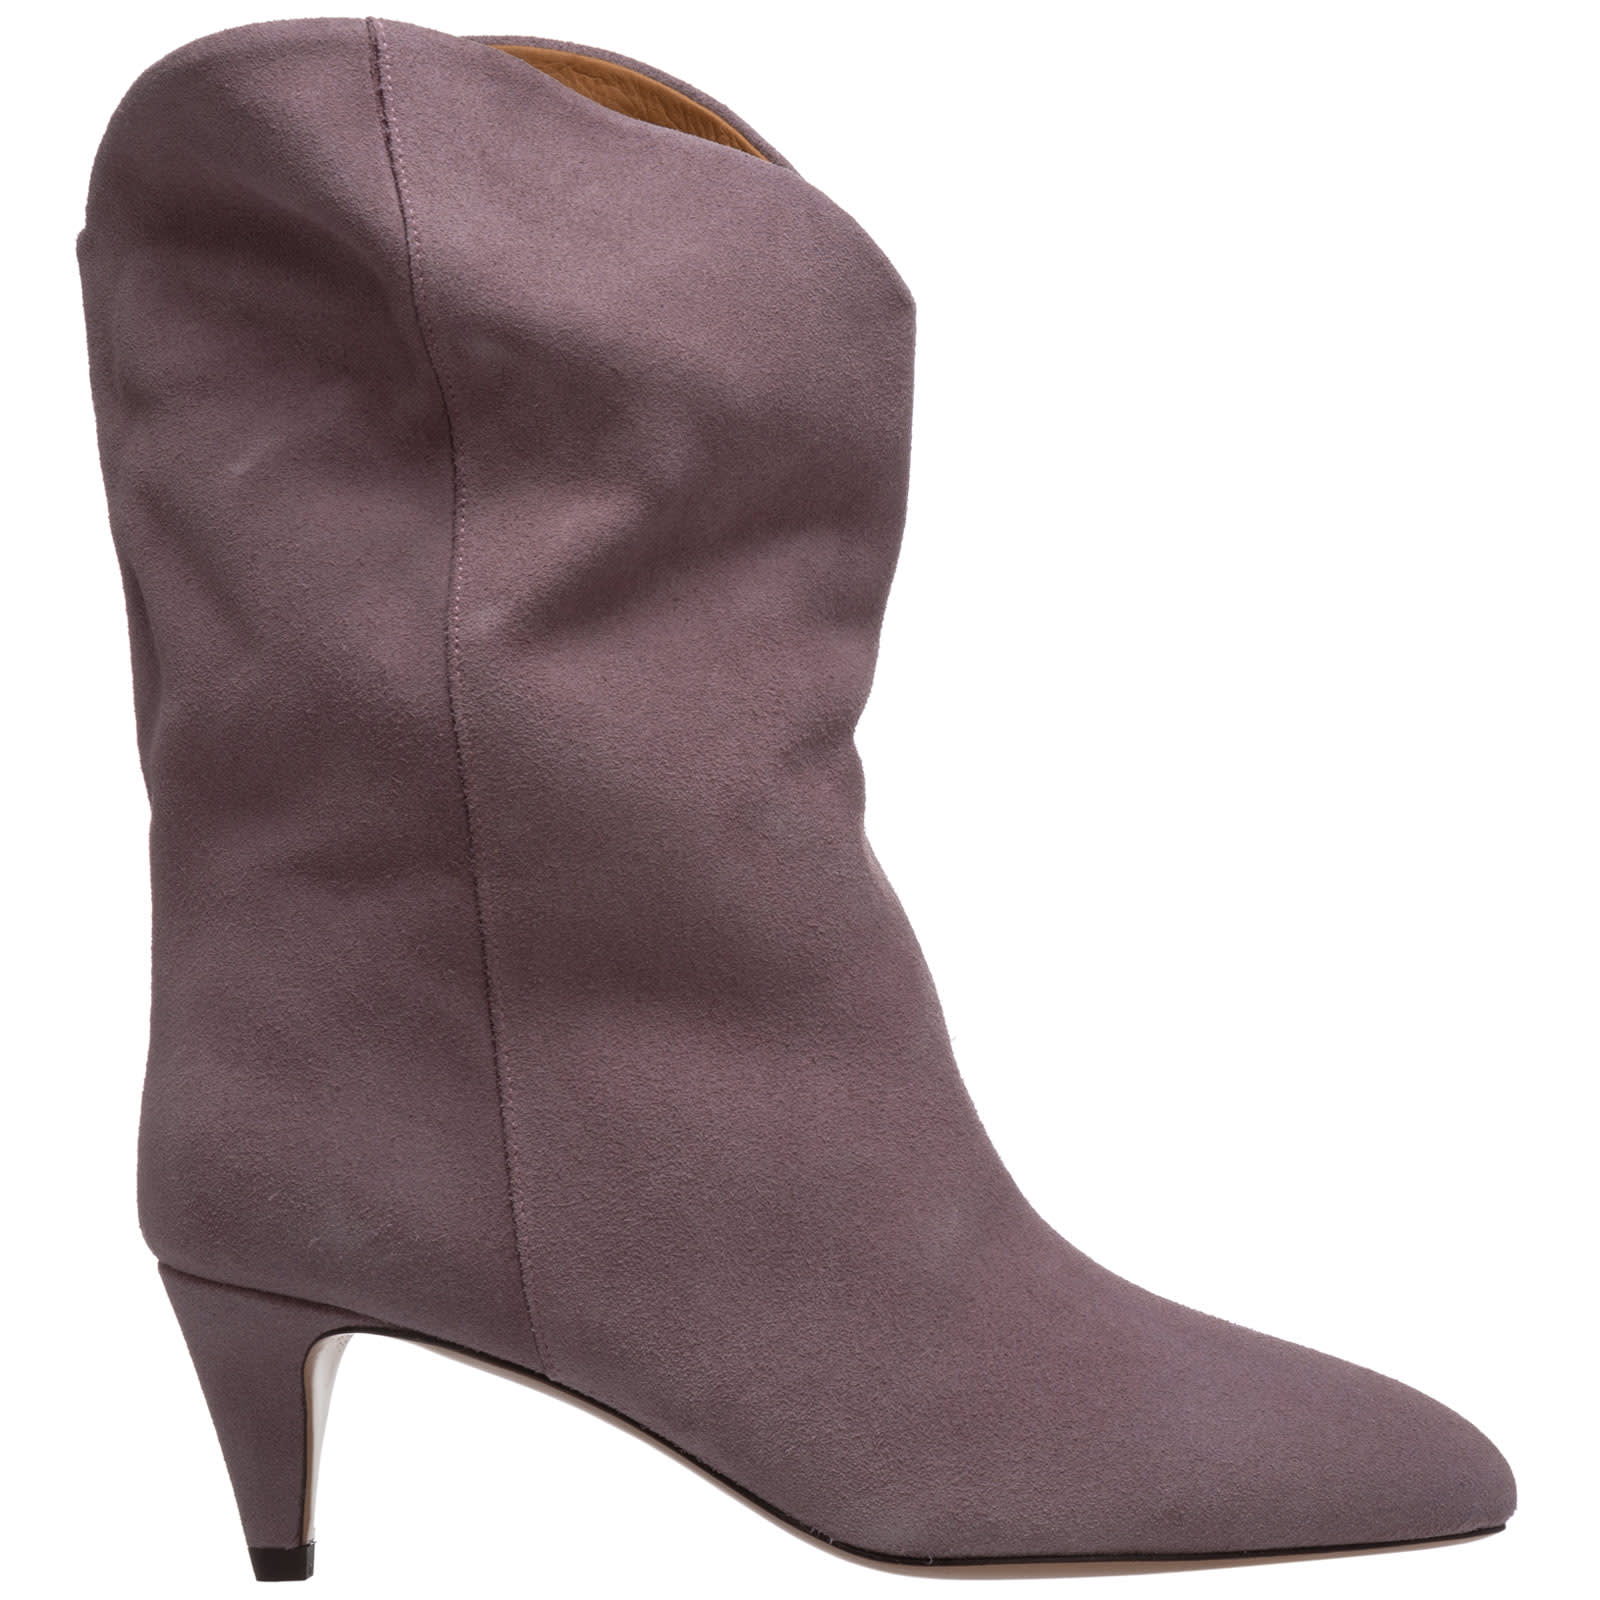 Buy Isabel Marant Dernee Heeled Ankle Boots online, shop Isabel Marant shoes with free shipping